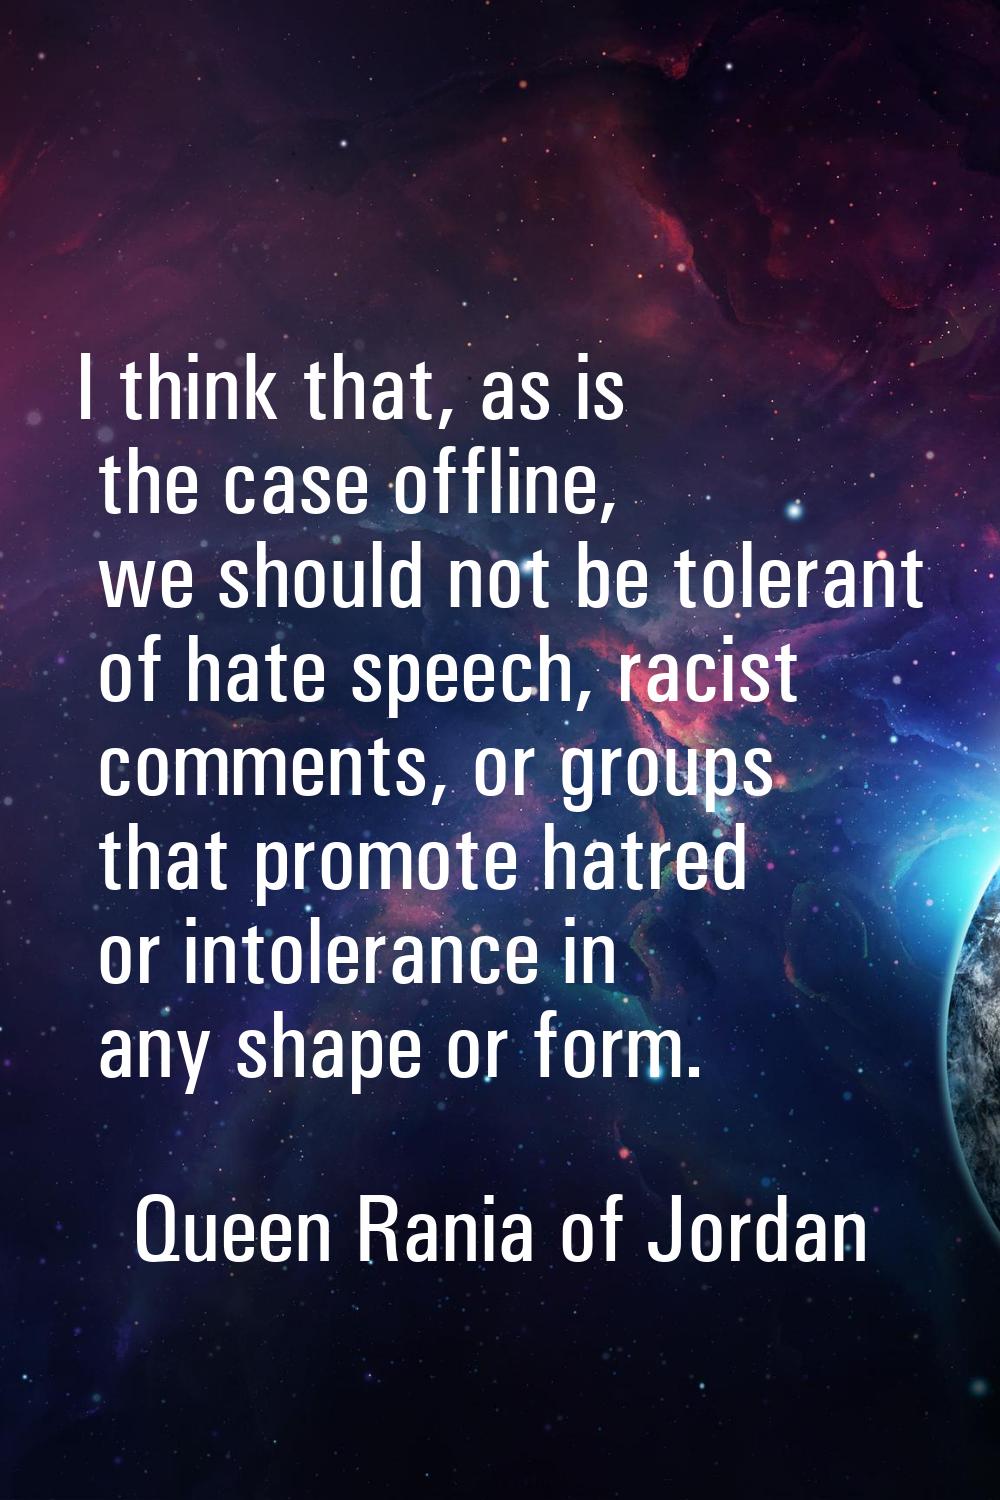 I think that, as is the case offline, we should not be tolerant of hate speech, racist comments, or